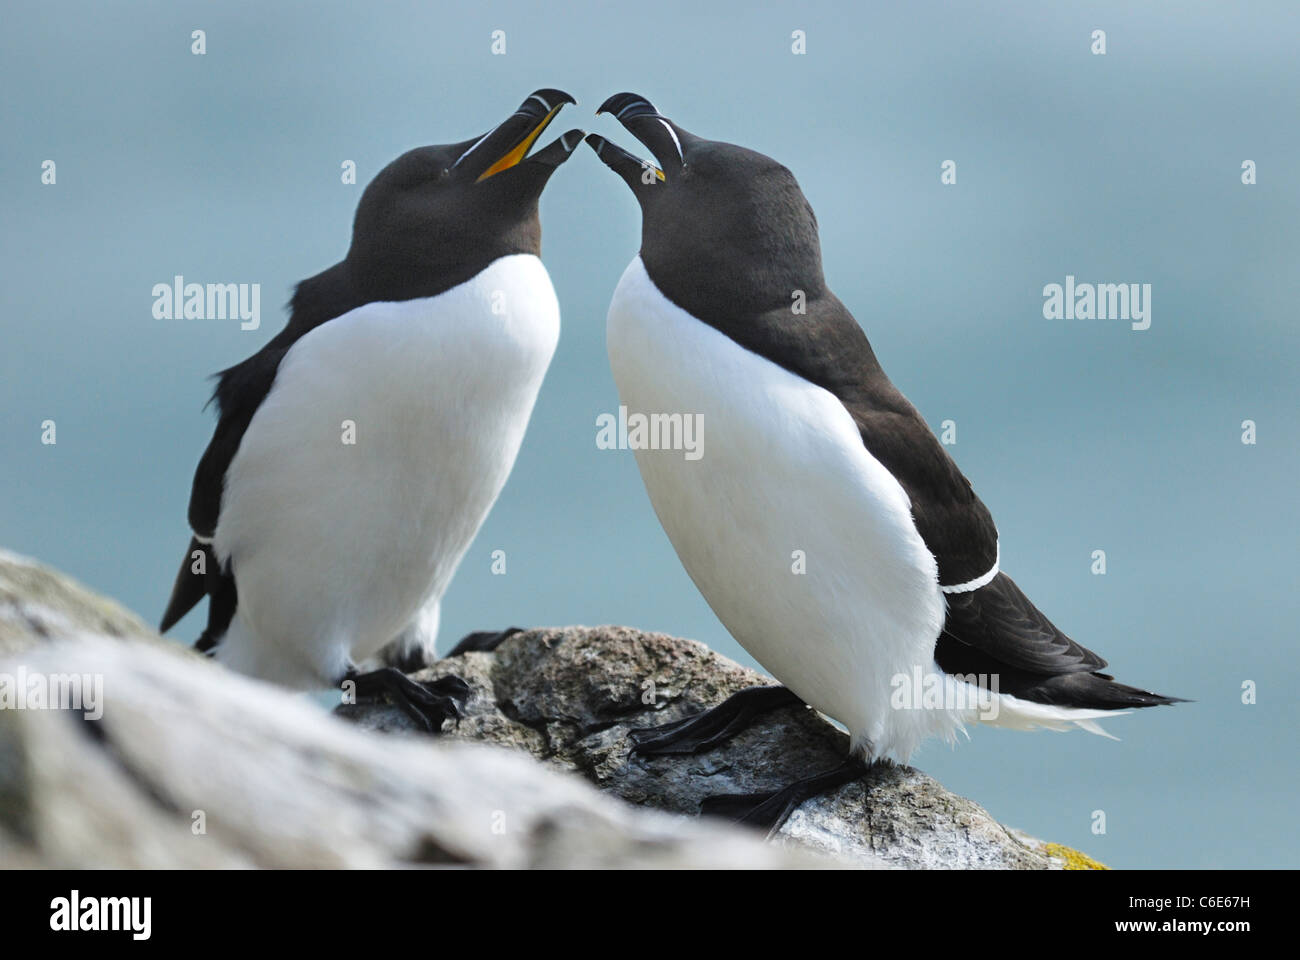 A pair of Razorbills (Alca torda) courting on the cliffs of Skomer Island, Pembrokeshire, Wales, UK. May 2011. Stock Photo